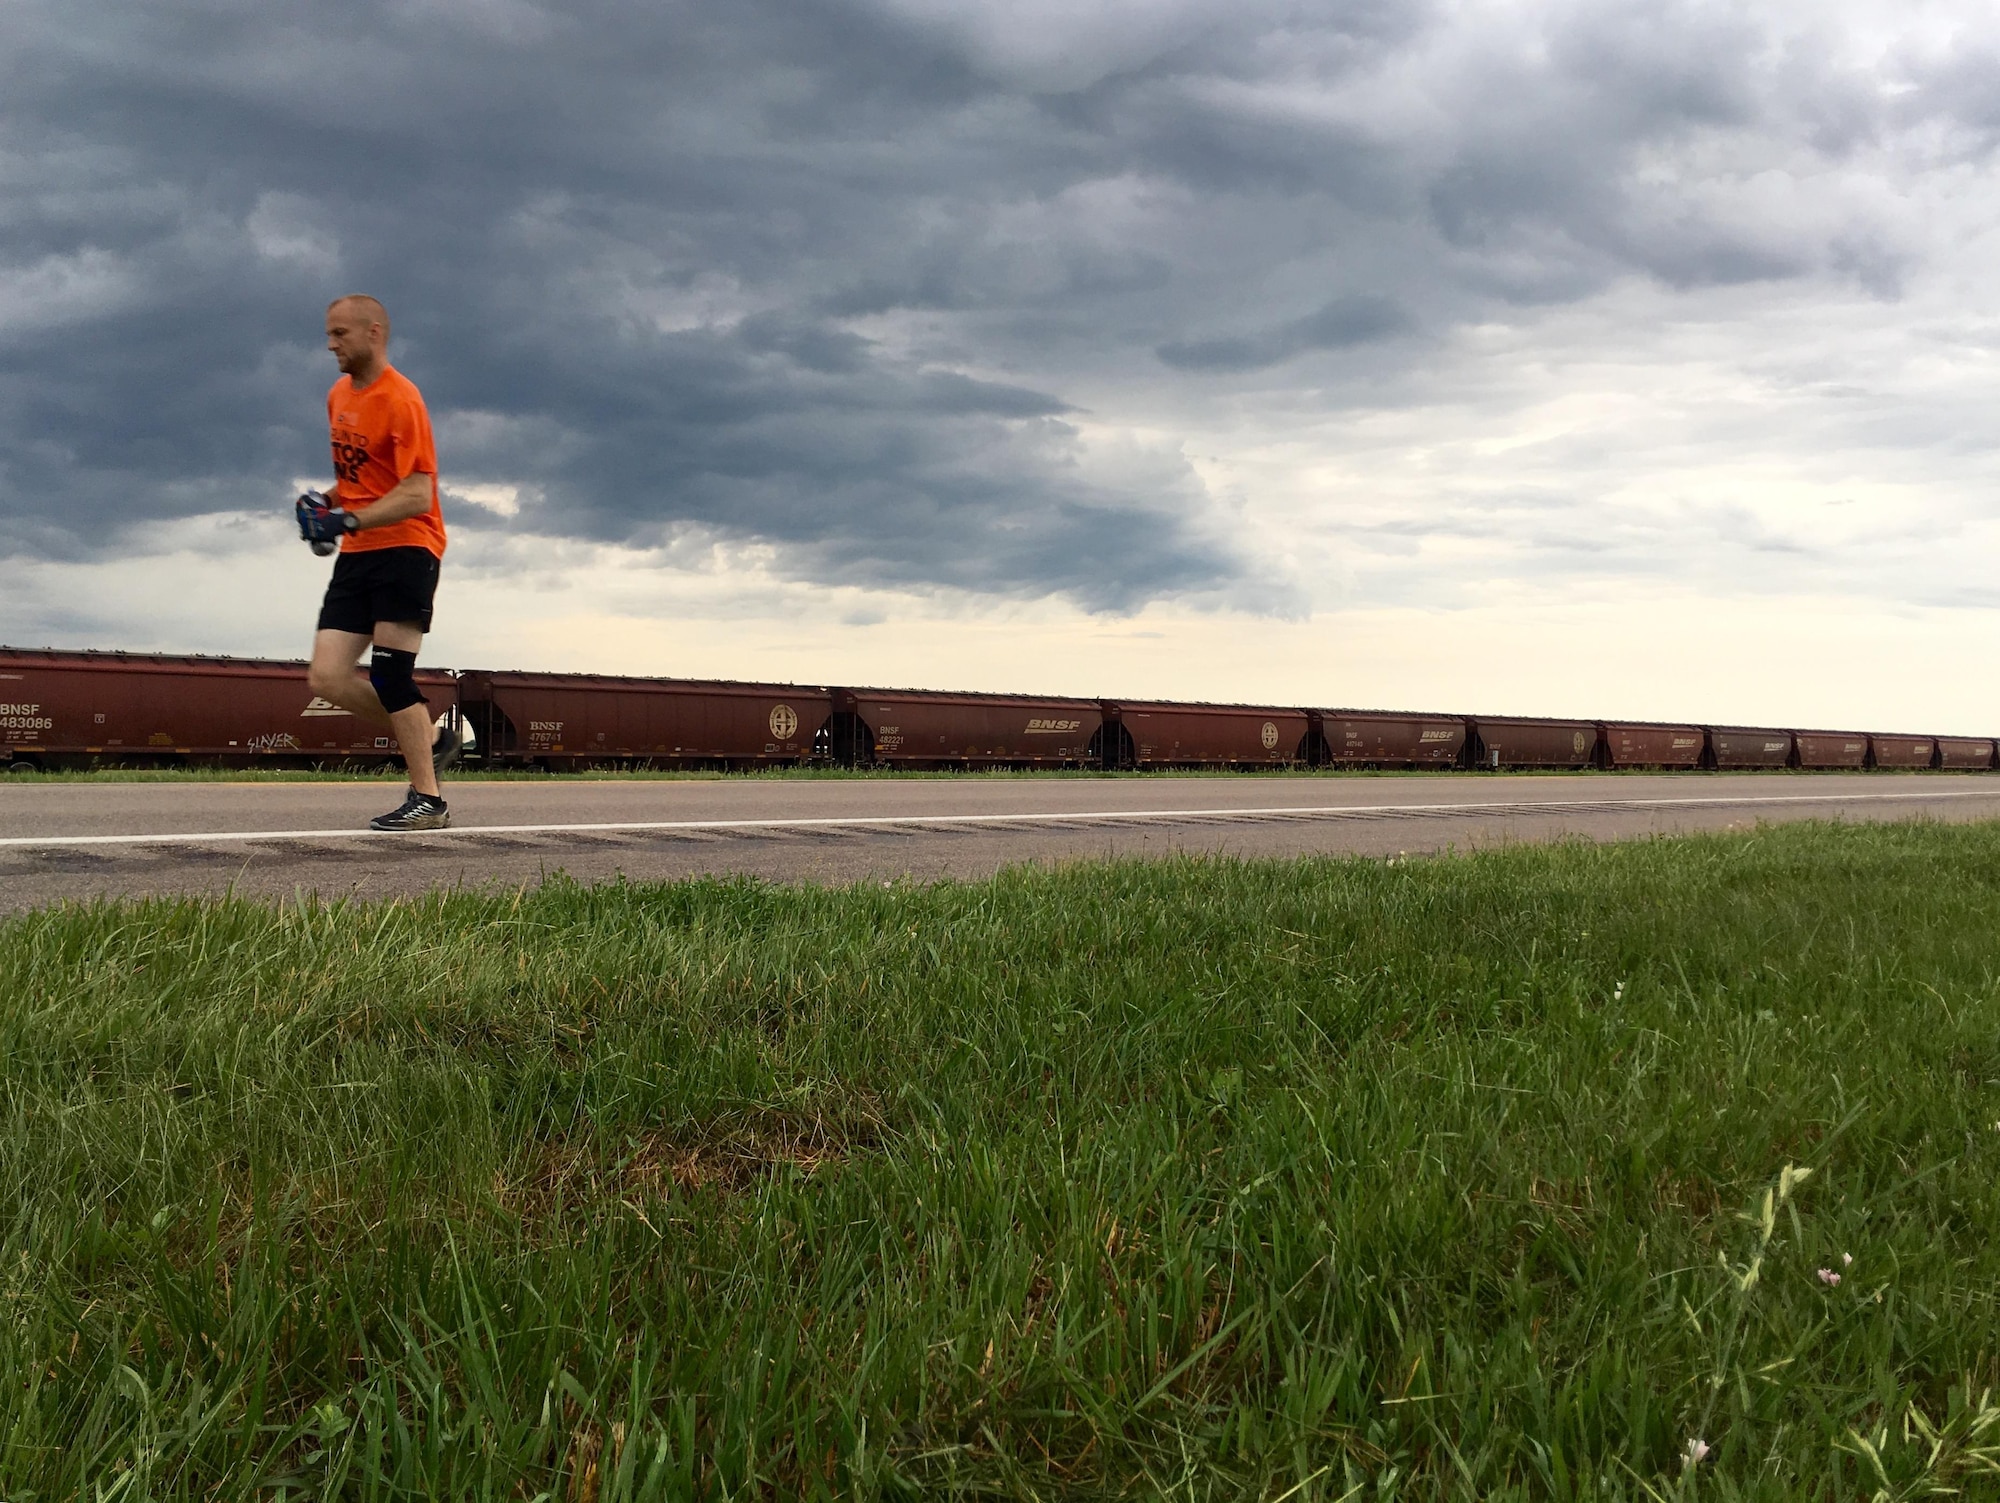 Staff Sgt. Sammy Bridges, NCO in charge of operations support with the 55th Security Forces Squadron at Offutt Air Force Base, Neb., was one of 17 runners selected out of hundreds of ultra-runner applicants to complete the MS Run the US Relay June 8 through June 13, 2016, raising funds for a cure for multiple sclerosis. Bridges dedicated the run to his mother-in-law, who suffers from MS.